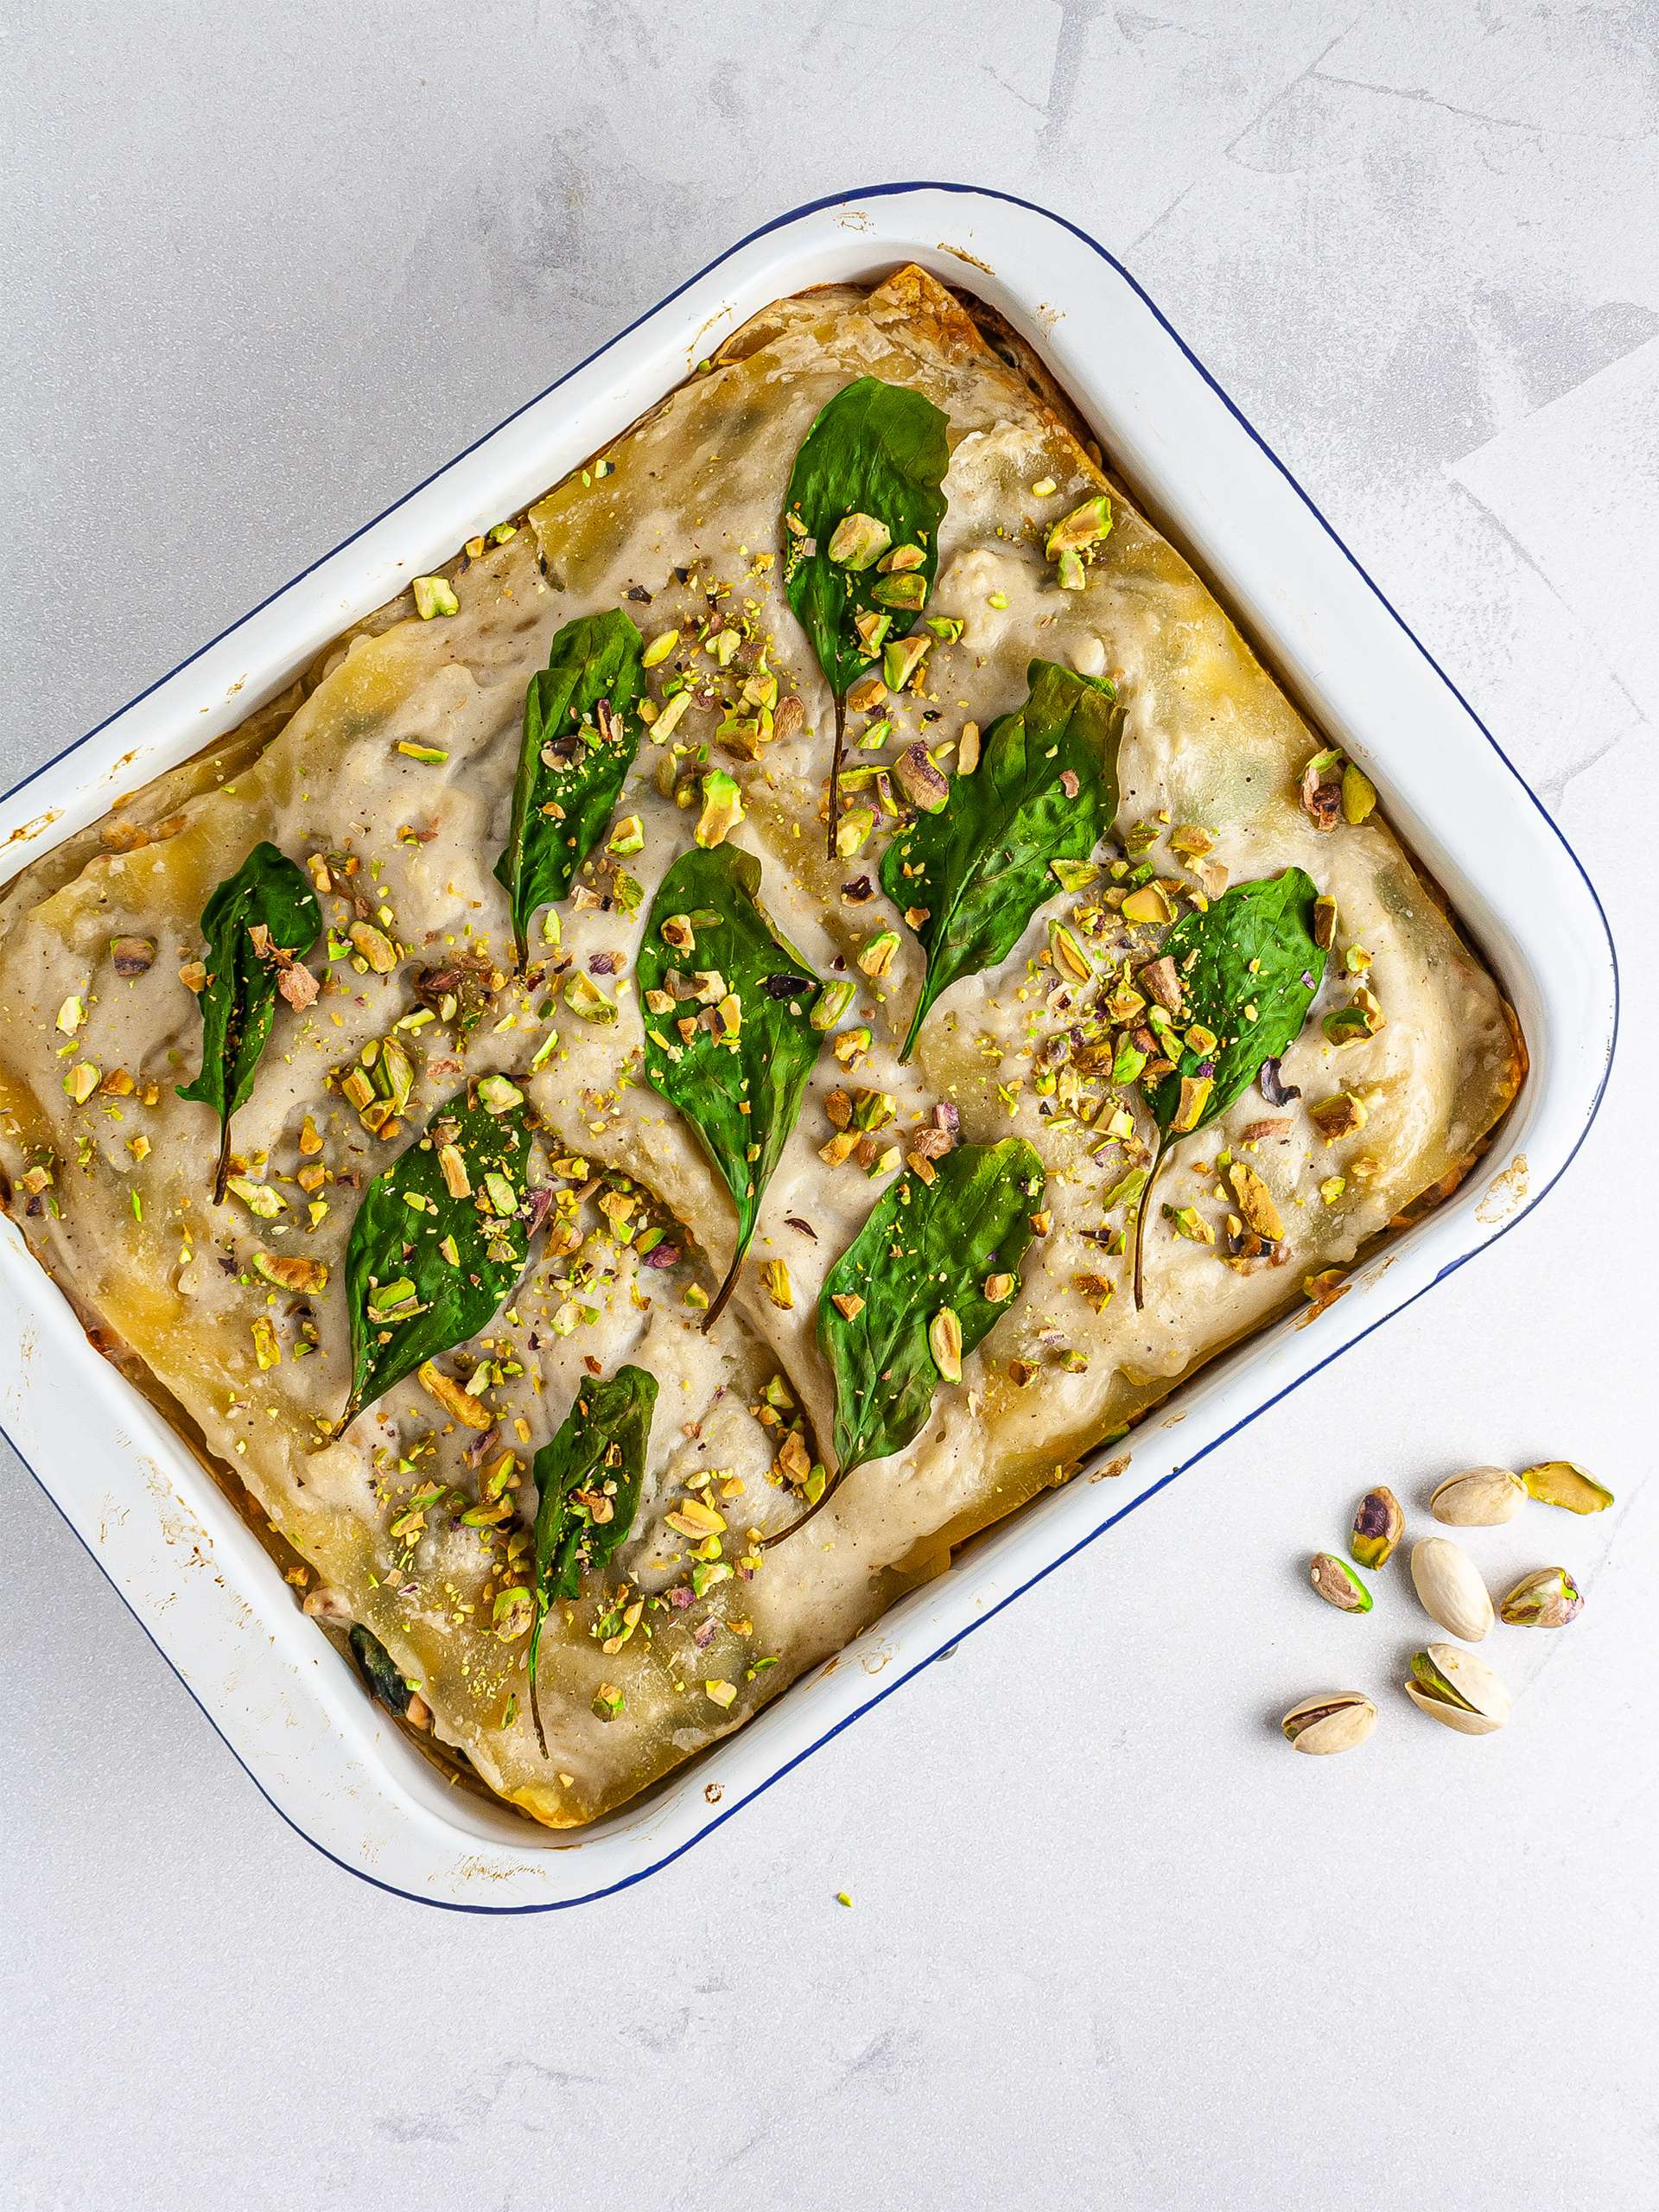 Baked spinach salmon lasagna topped with pistachio nuts